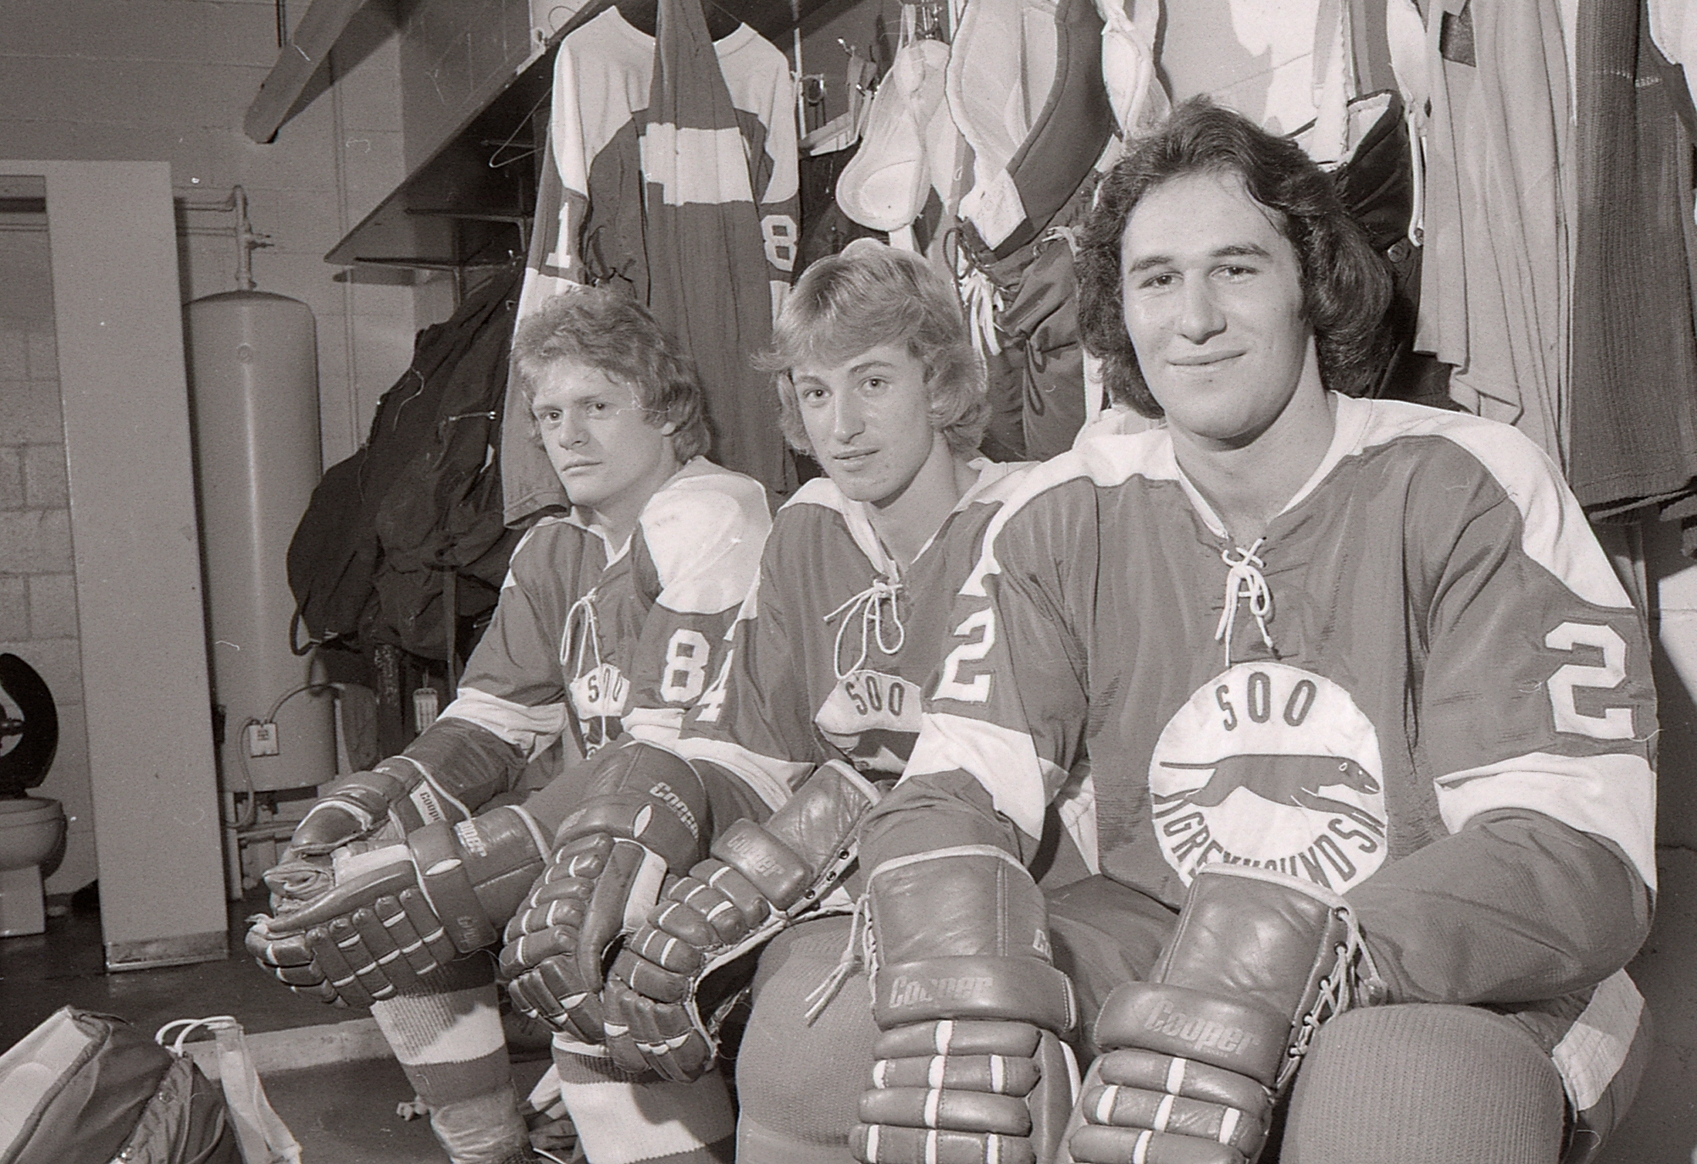 The young Wayne Gretzky was already the Great One